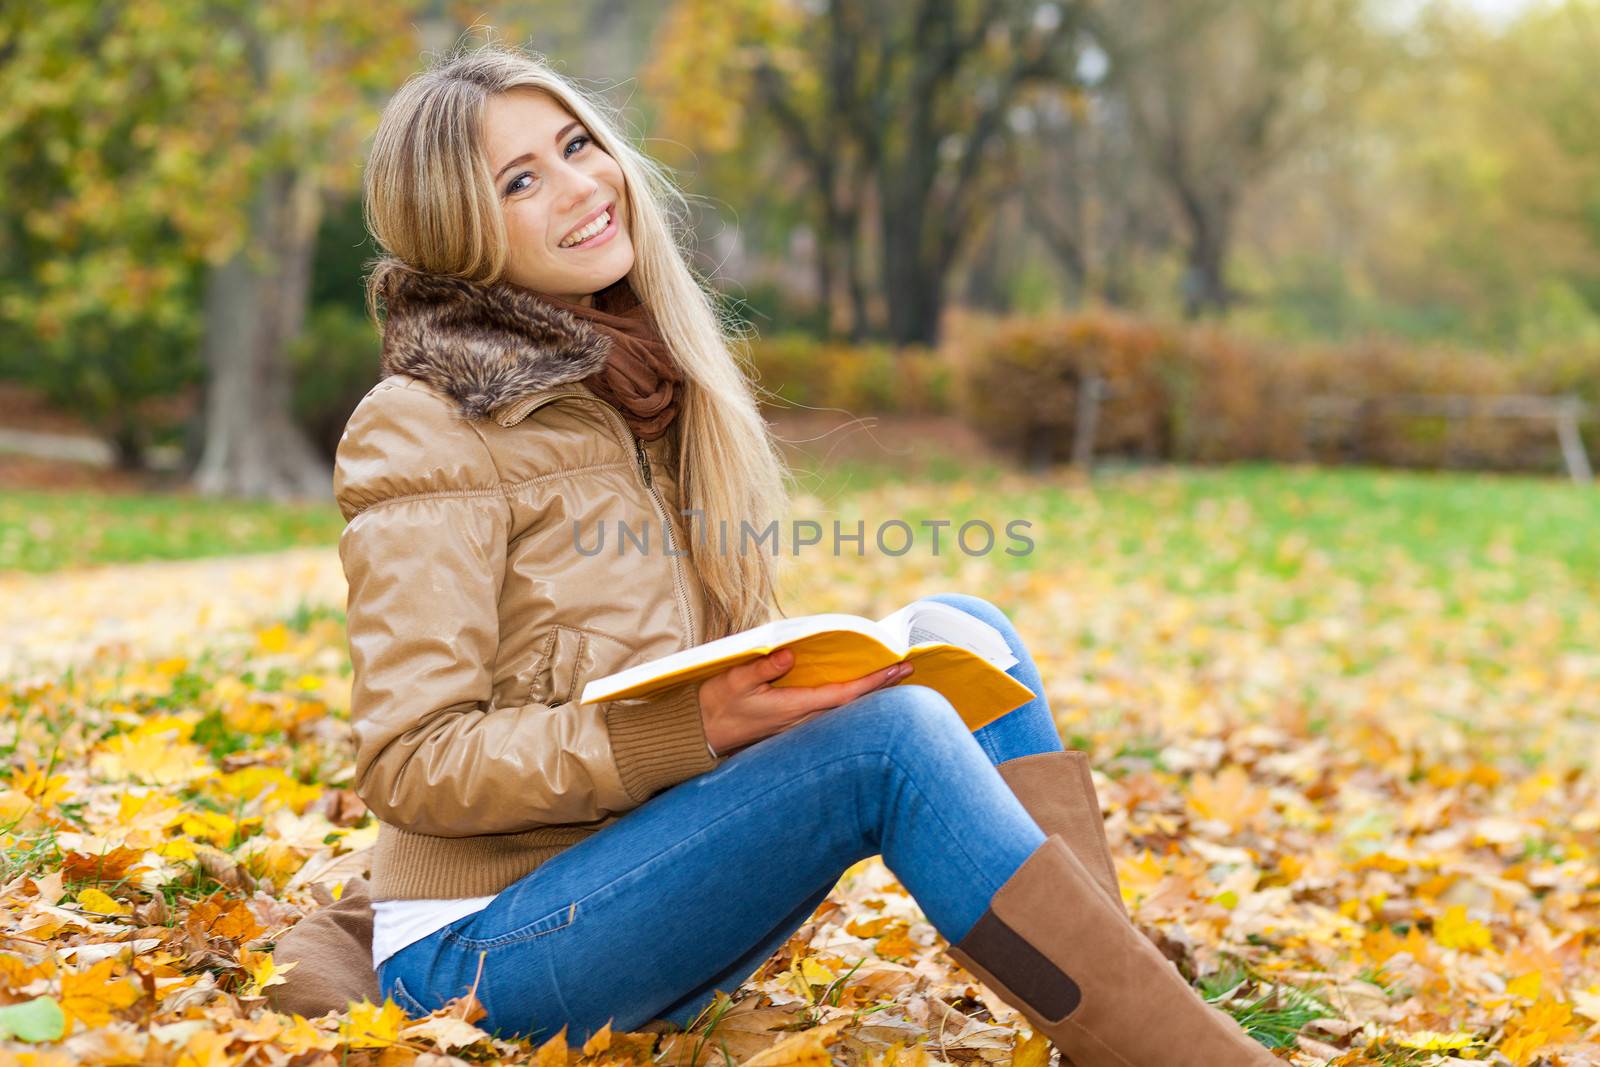 Young woman sitting in a park, holding a book and smiling